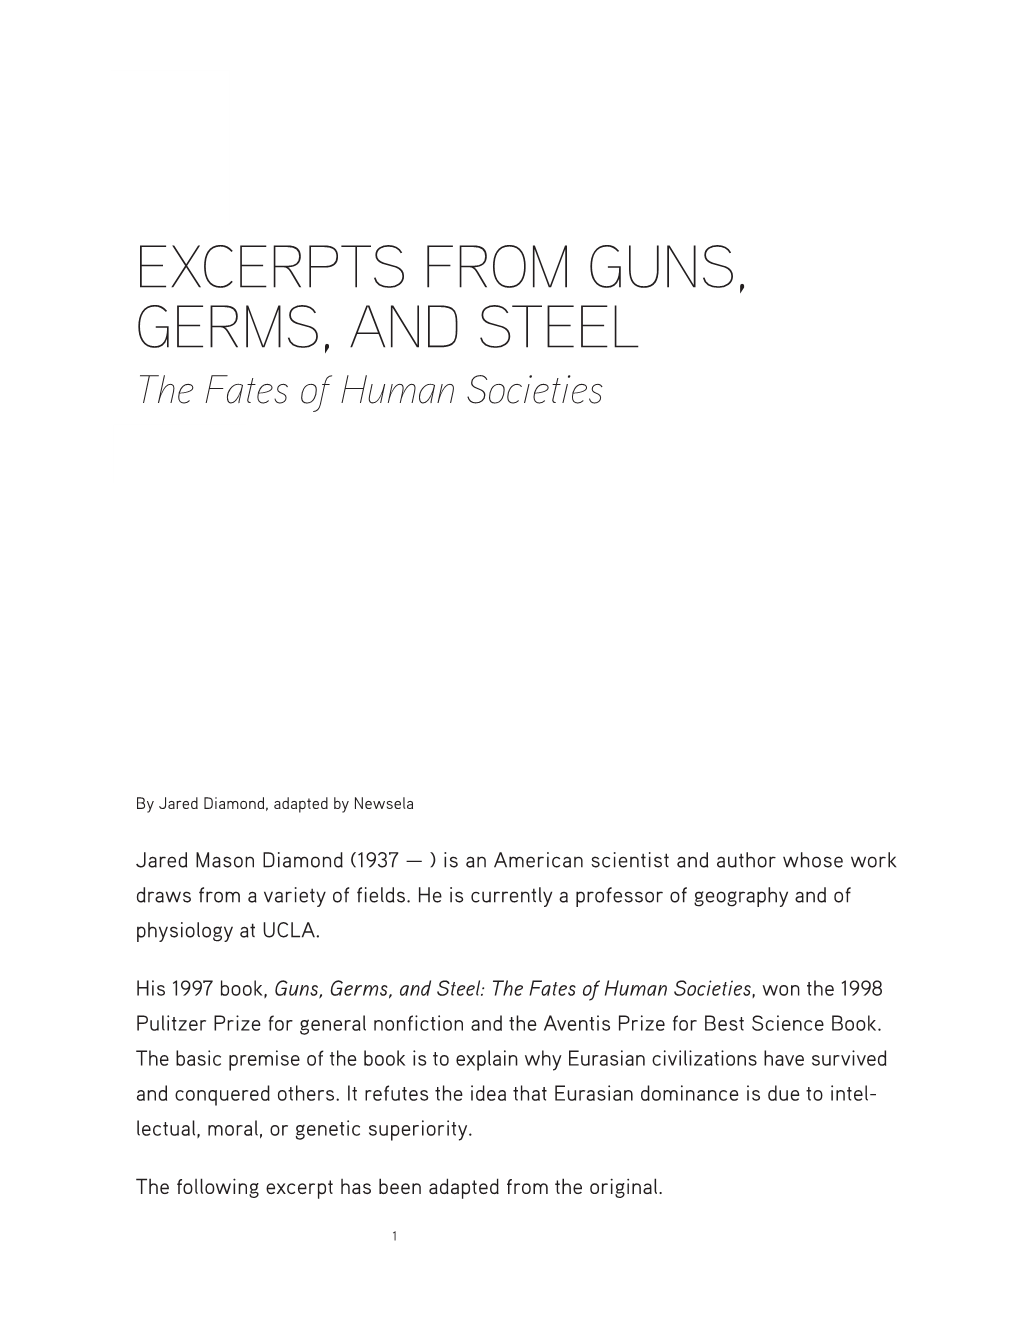 EXCERPTS from GUNS, GERMS, and STEEL the Fates of Human Societies 1060L